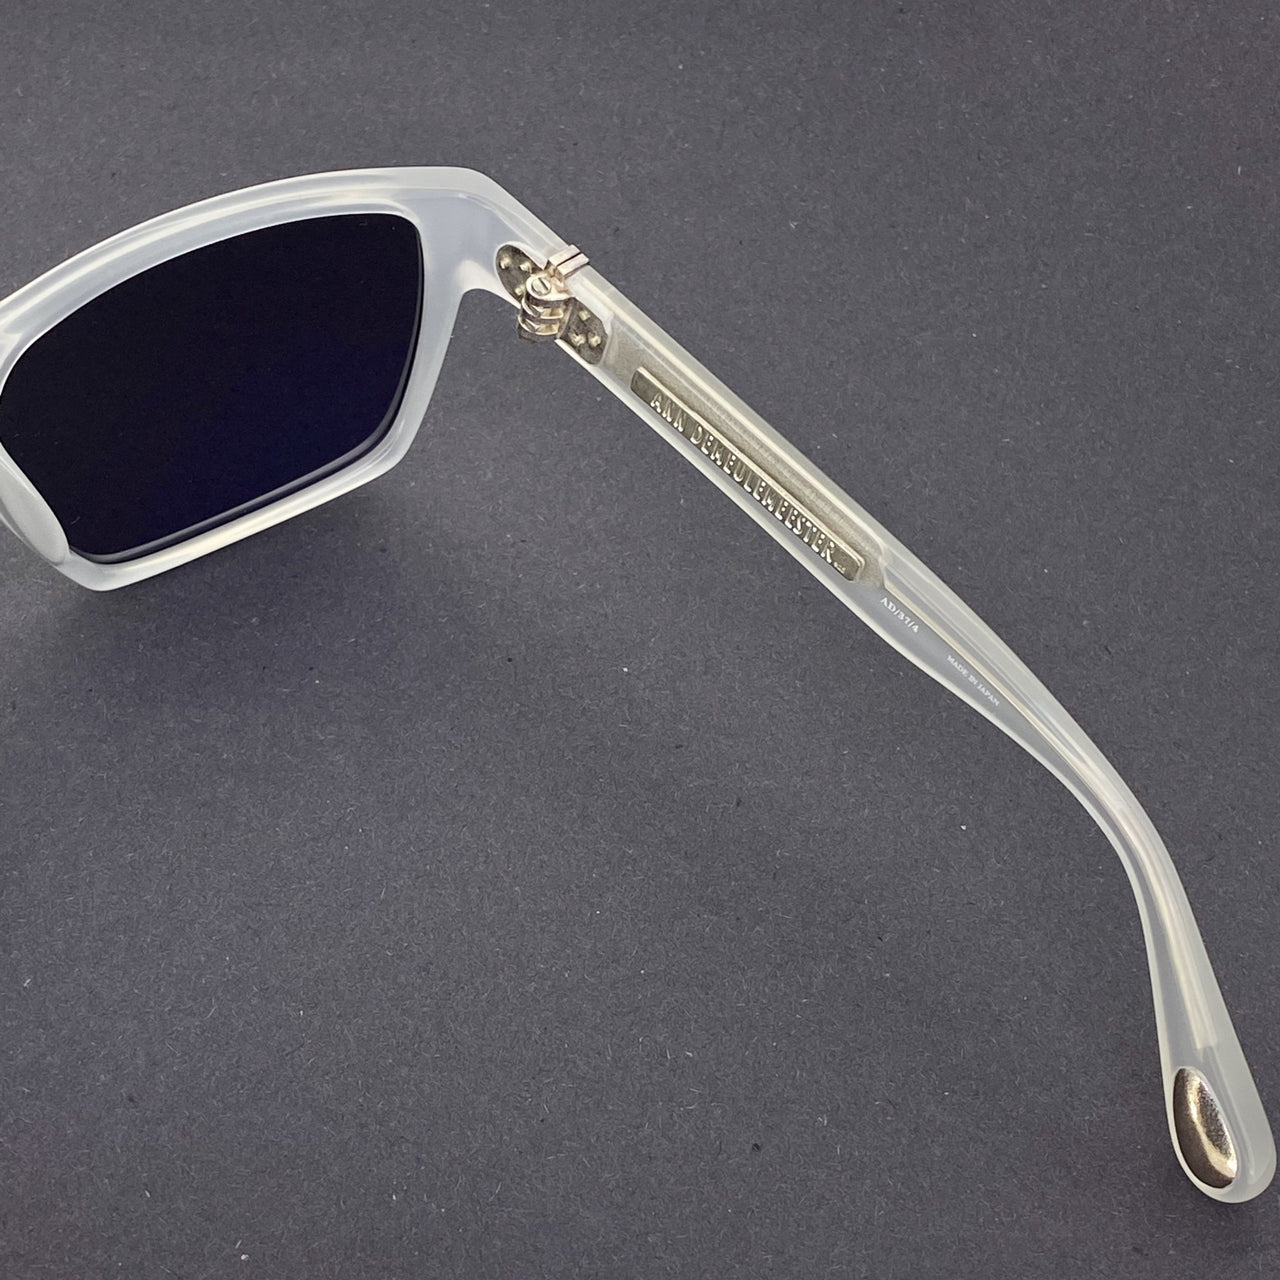 Ann Demeulemeester Sunglasses Angular White 925 Silver with Grey Lenses AD37C4SUN - Watches & Crystals